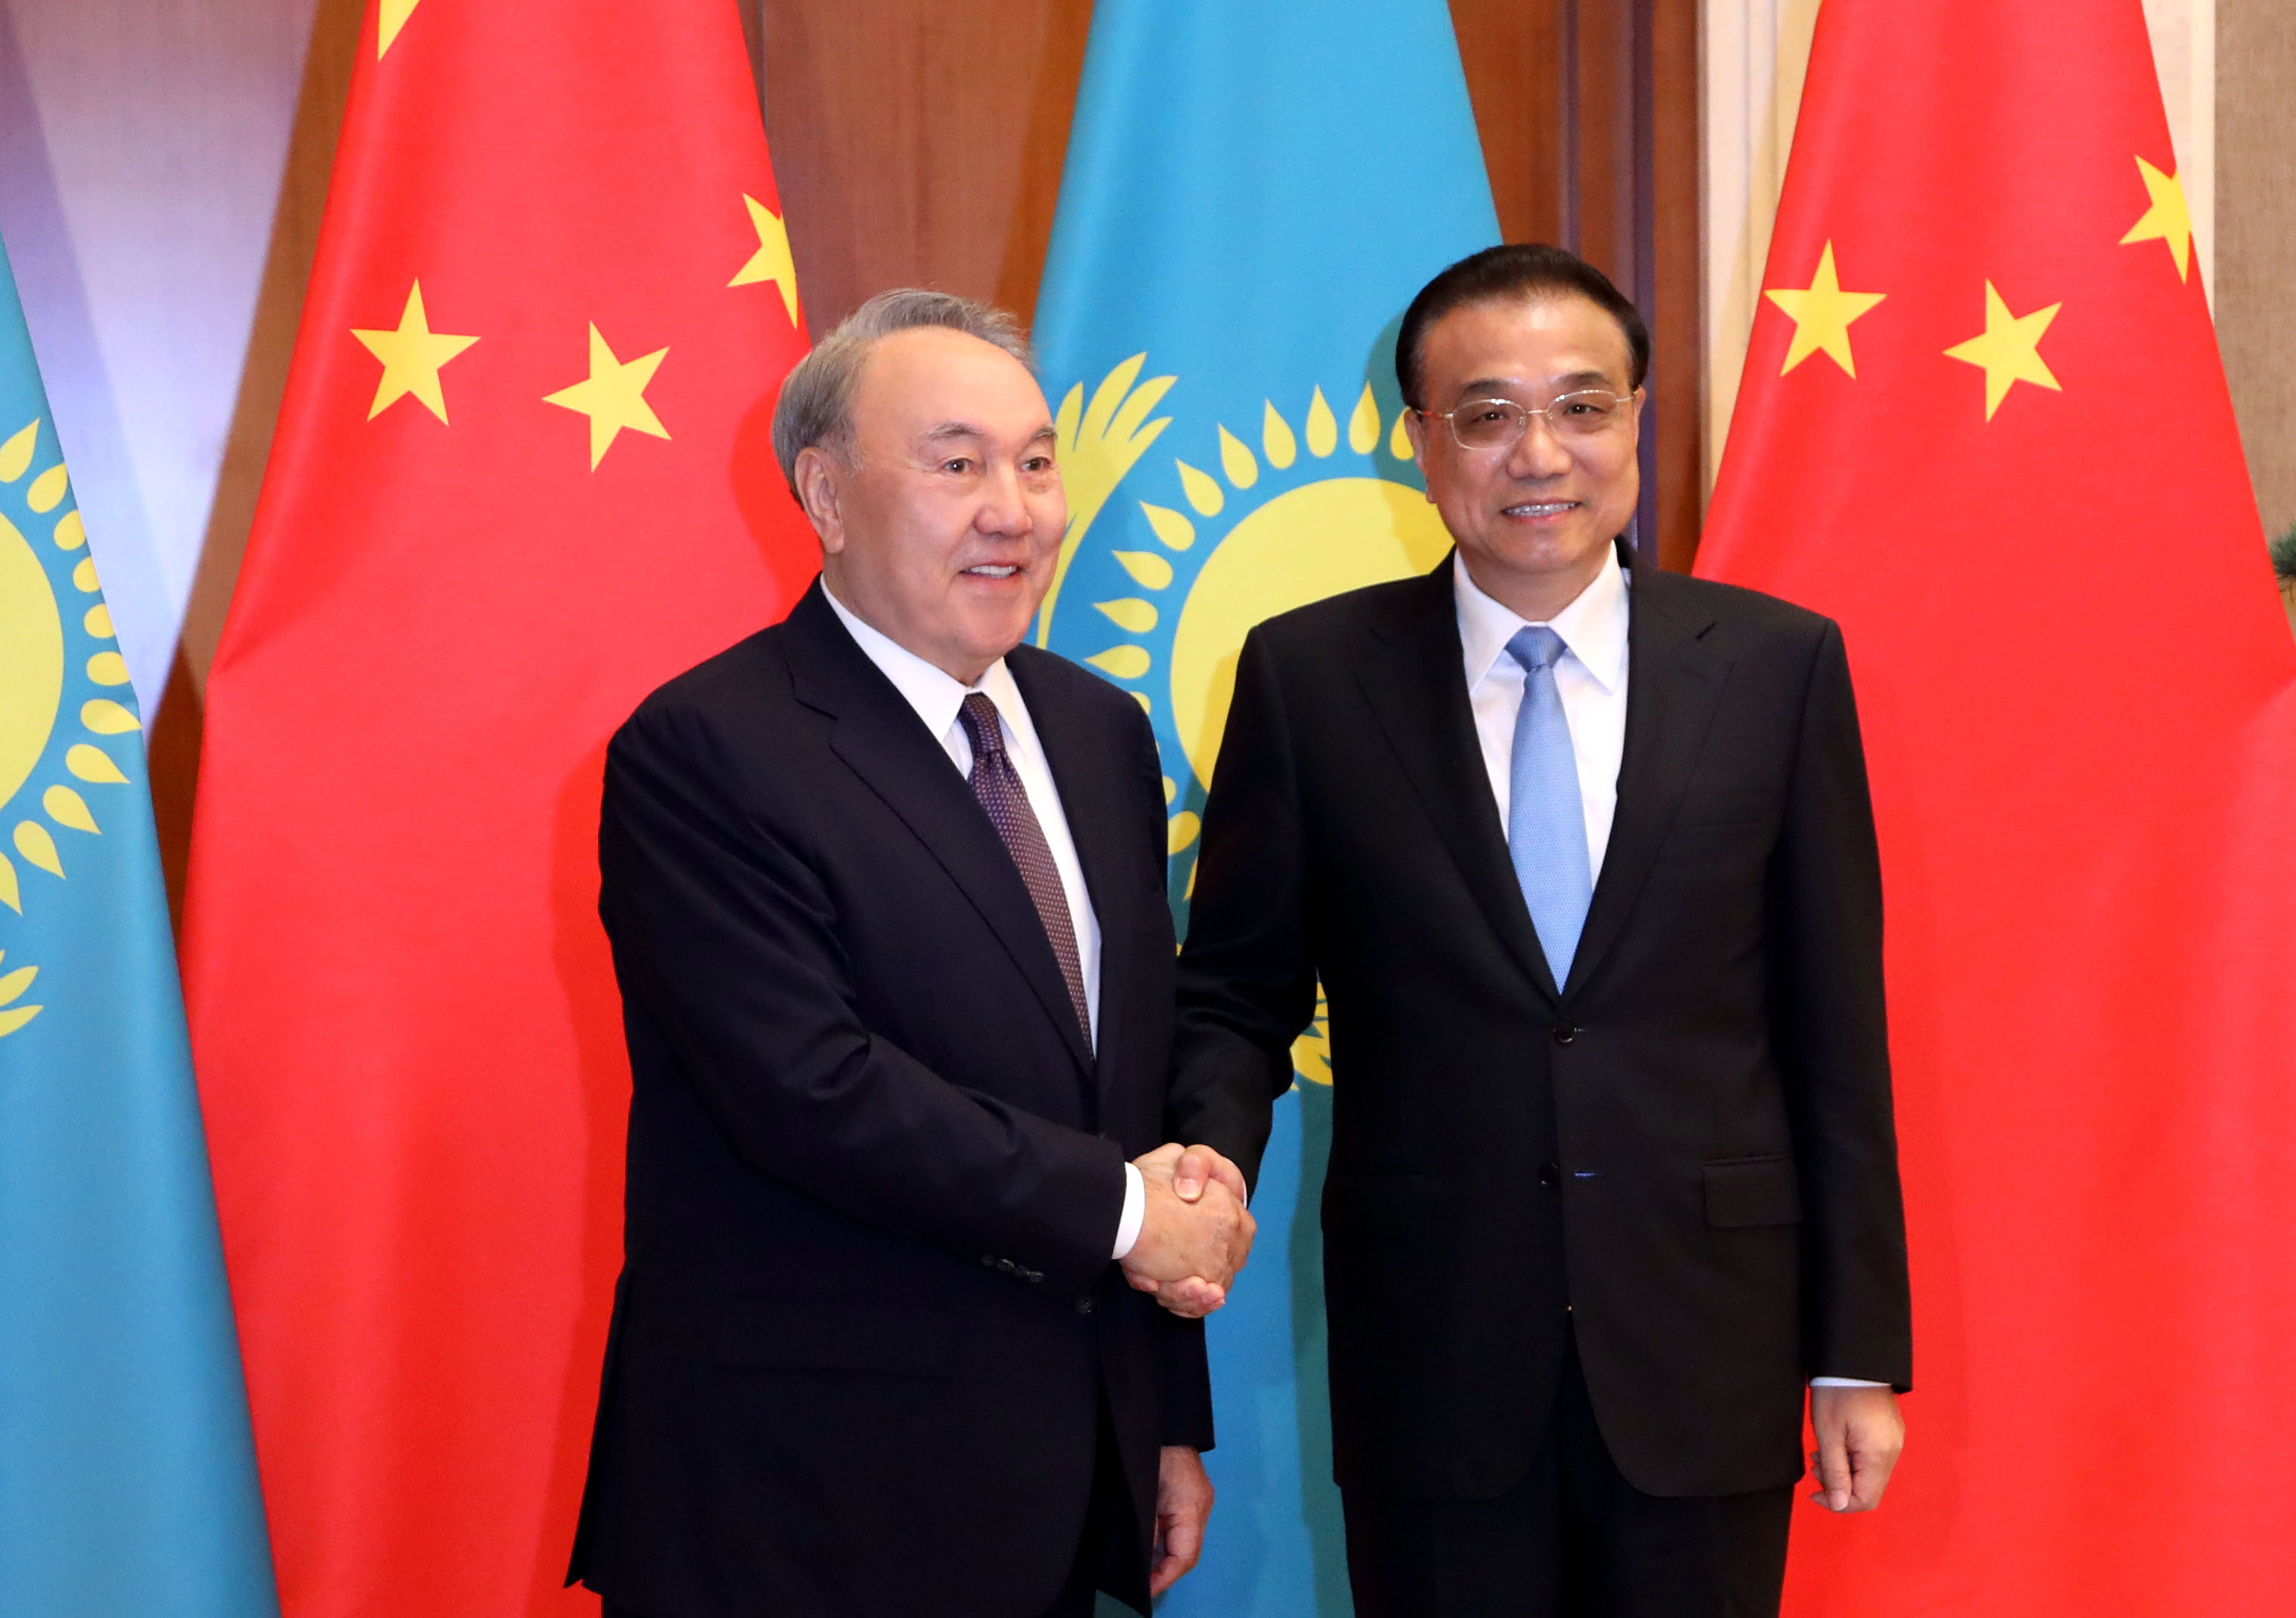 Kazakh President meets with Li Keqiang, Premier of the State Council of the People's Republic of China